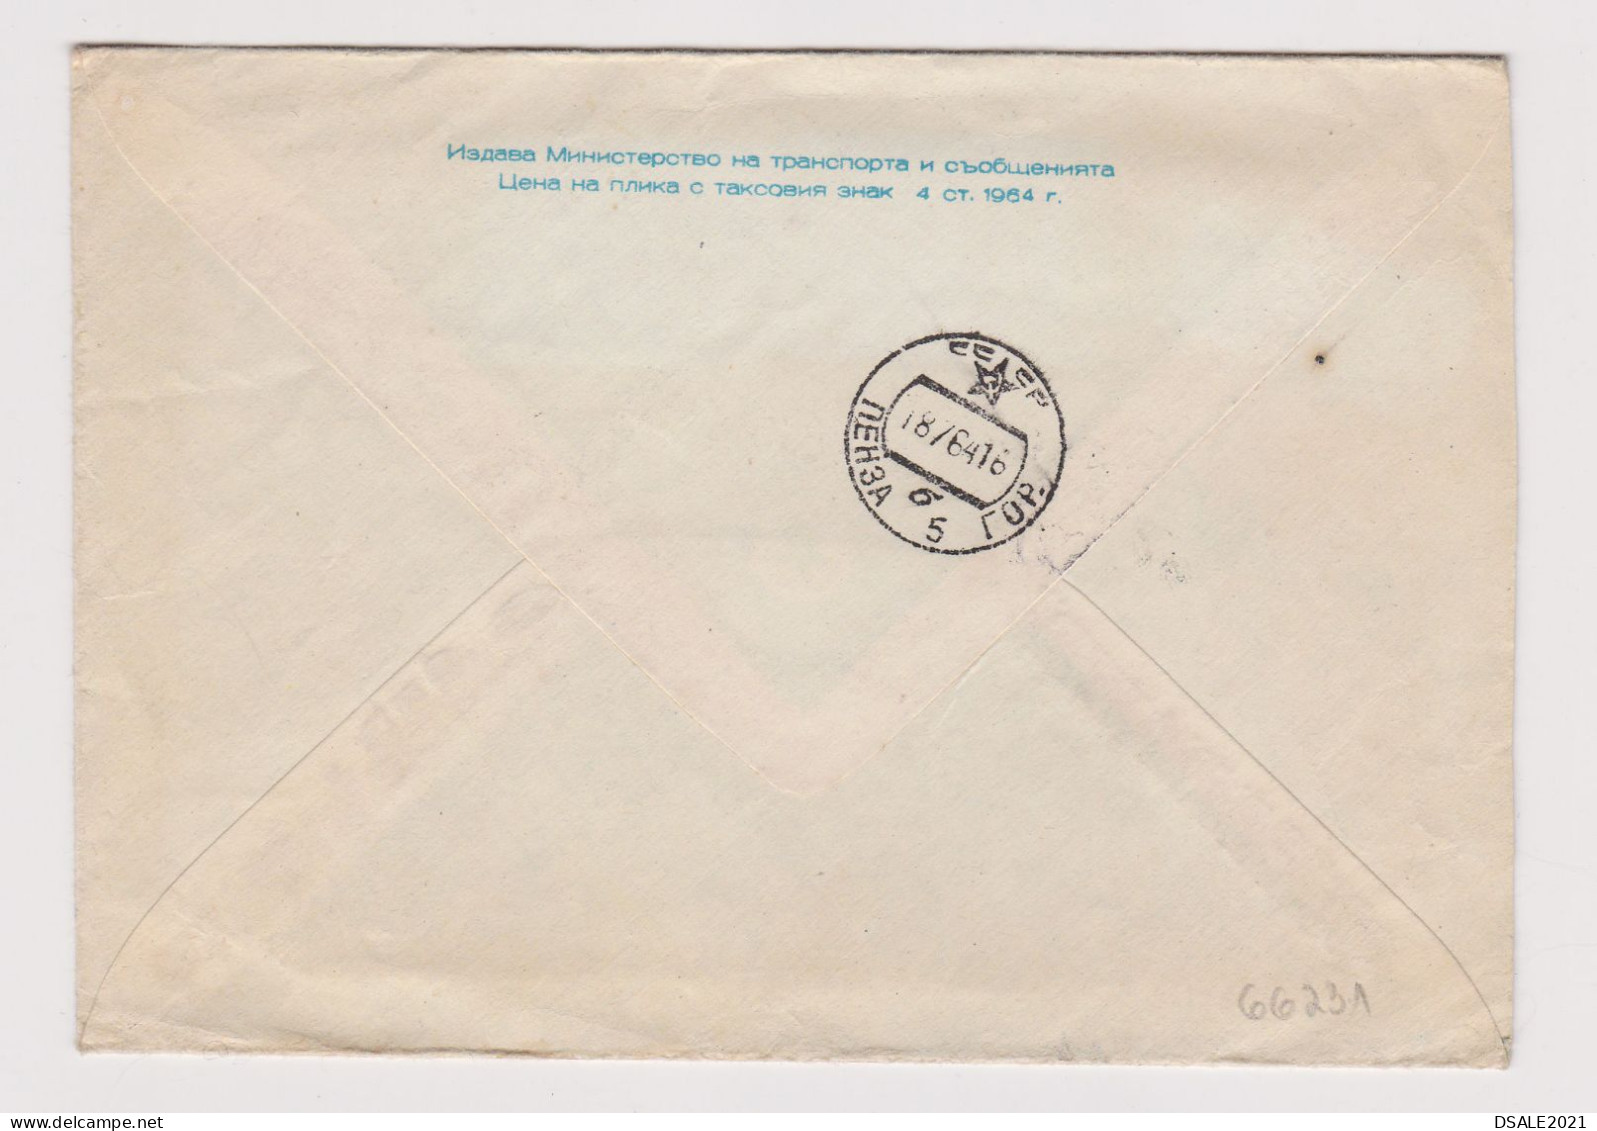 Bulgaria Bulgarien Bulgarie 1964 Postal Stationery Cover PSE, Entier, With Topic Stamps Sent To Russia USSR (66231) - Enveloppes